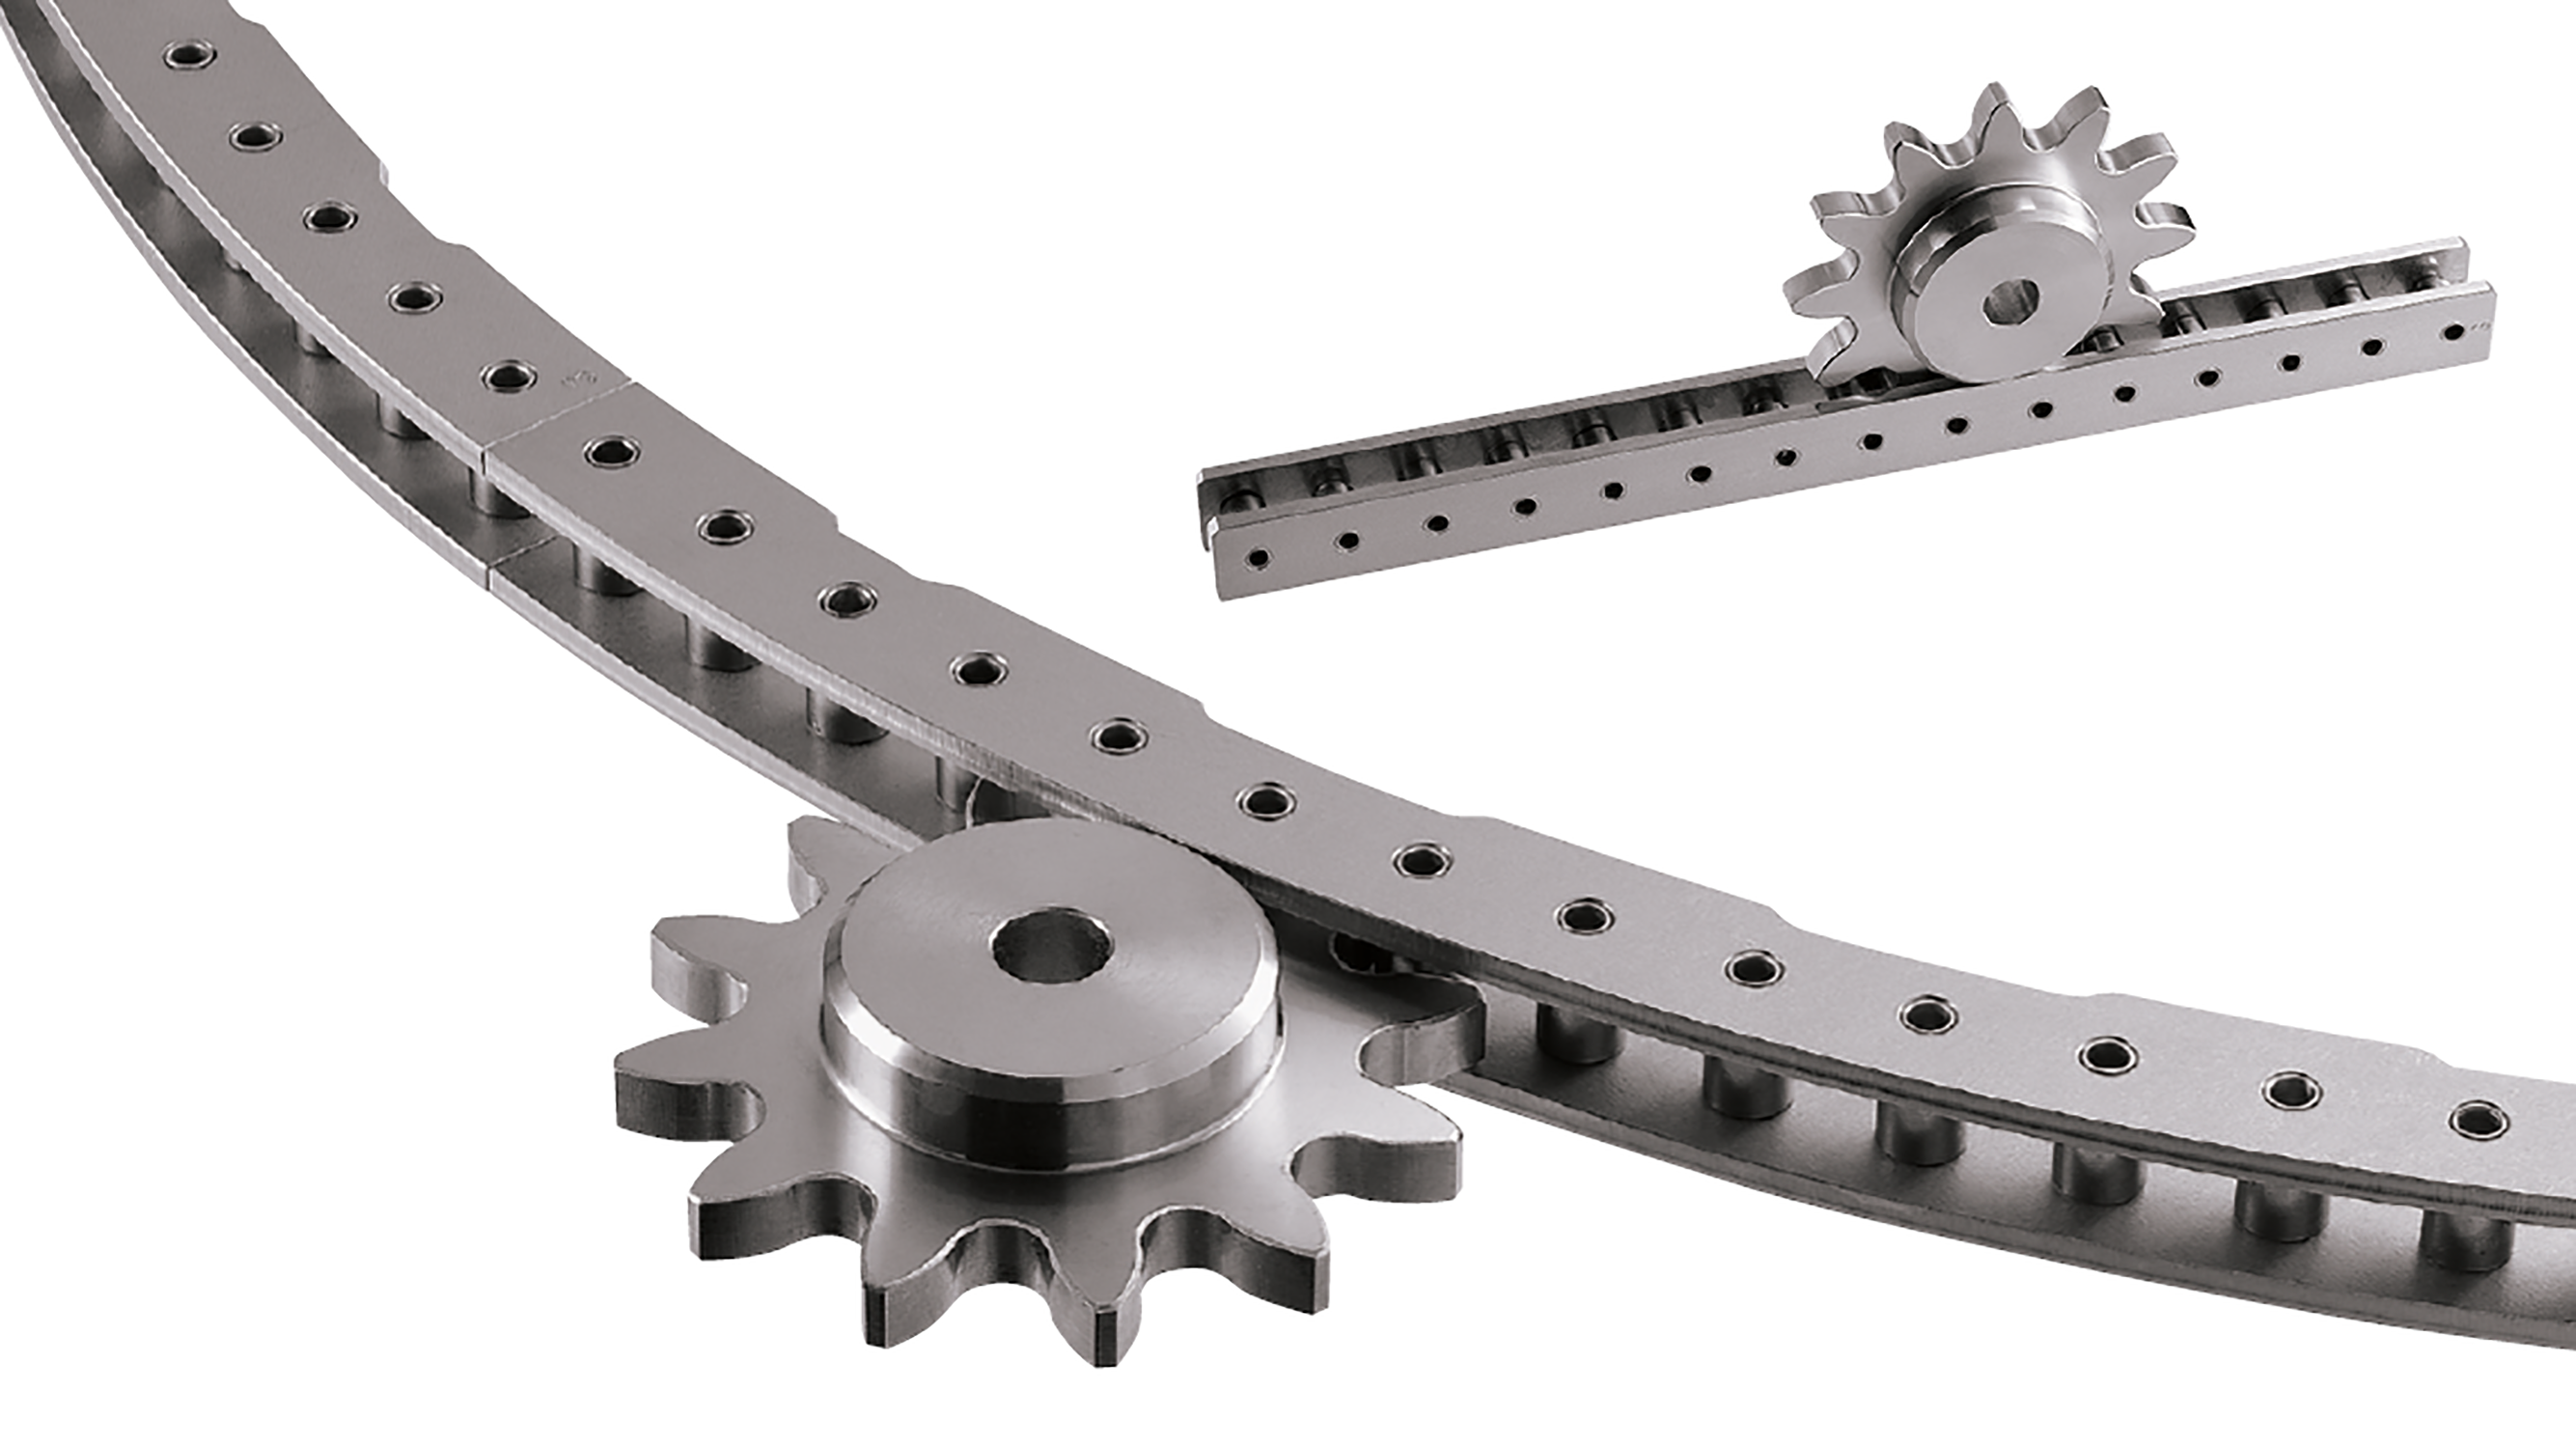 The Tsubaki Pin Gear Drive has optimised engagement of pin and gear which means that wheel diameter or rack length can be specified with complete freedom.